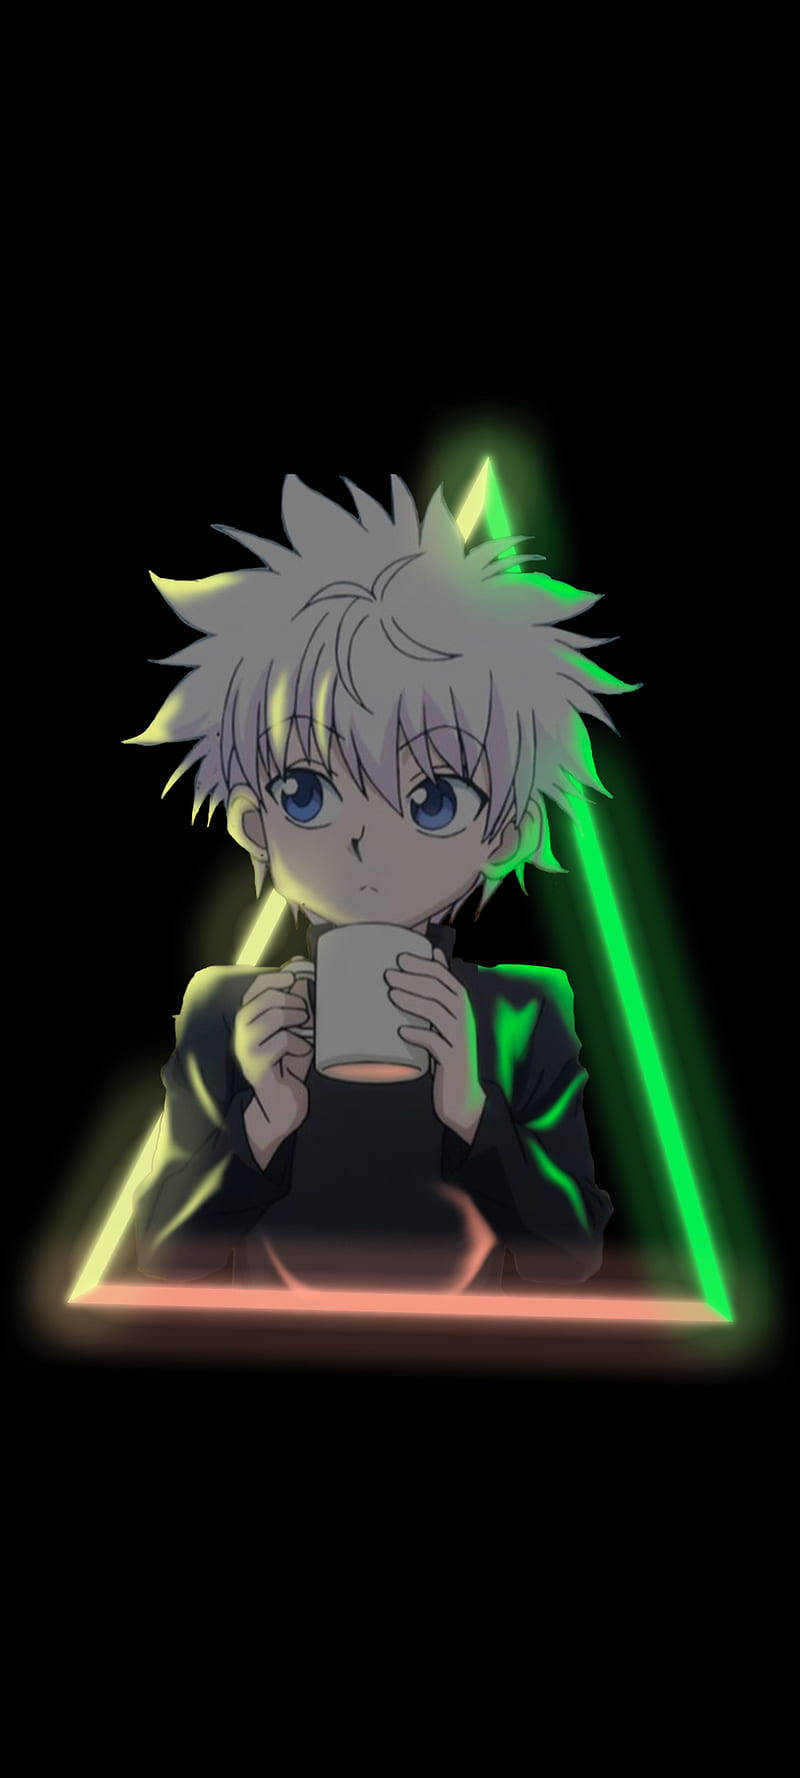 The Hunter X Hunter iPhone - Get hyped for the new HxH app today! Wallpaper